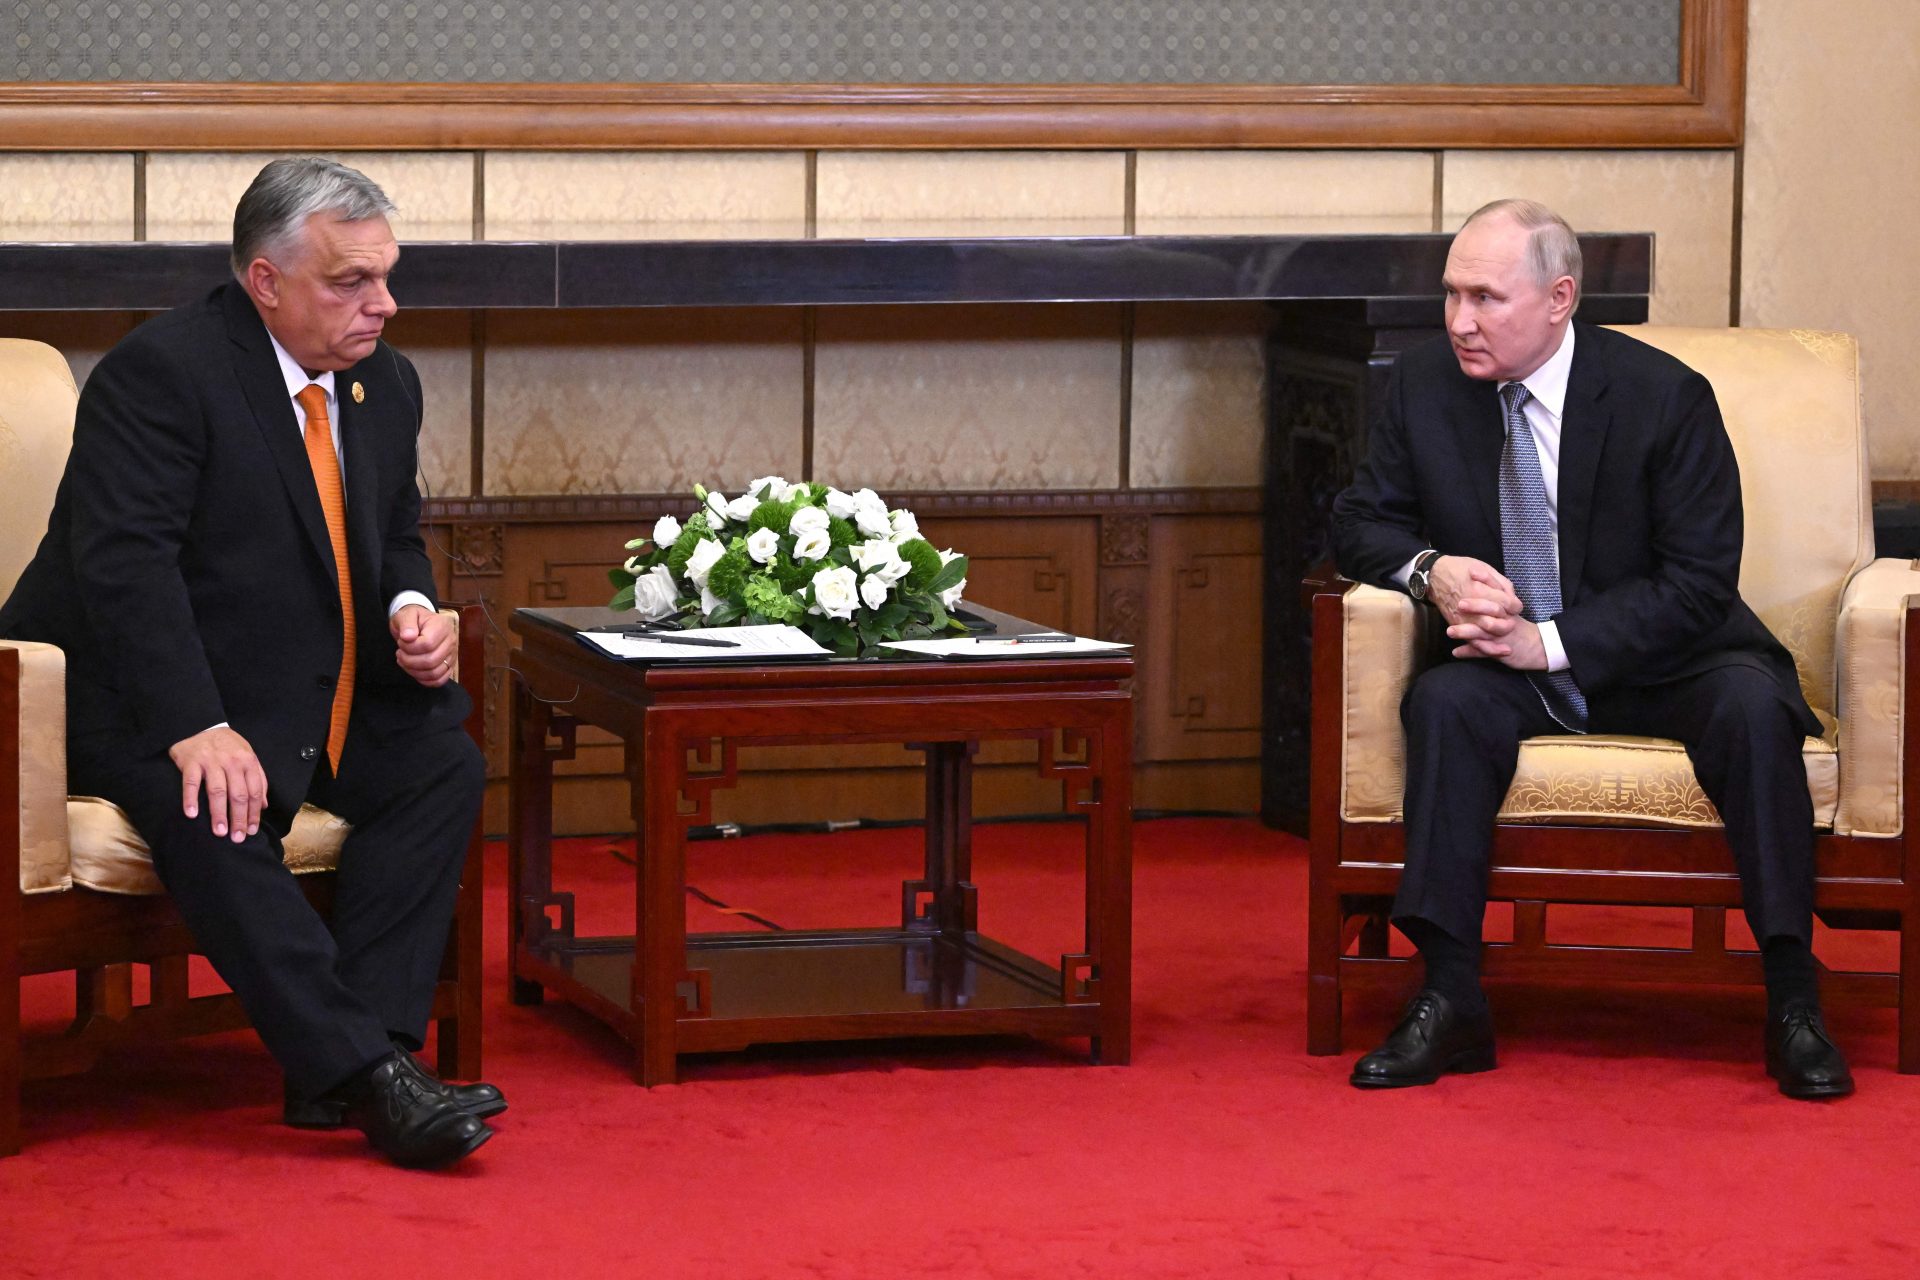 Putin’s photo op with Orbán